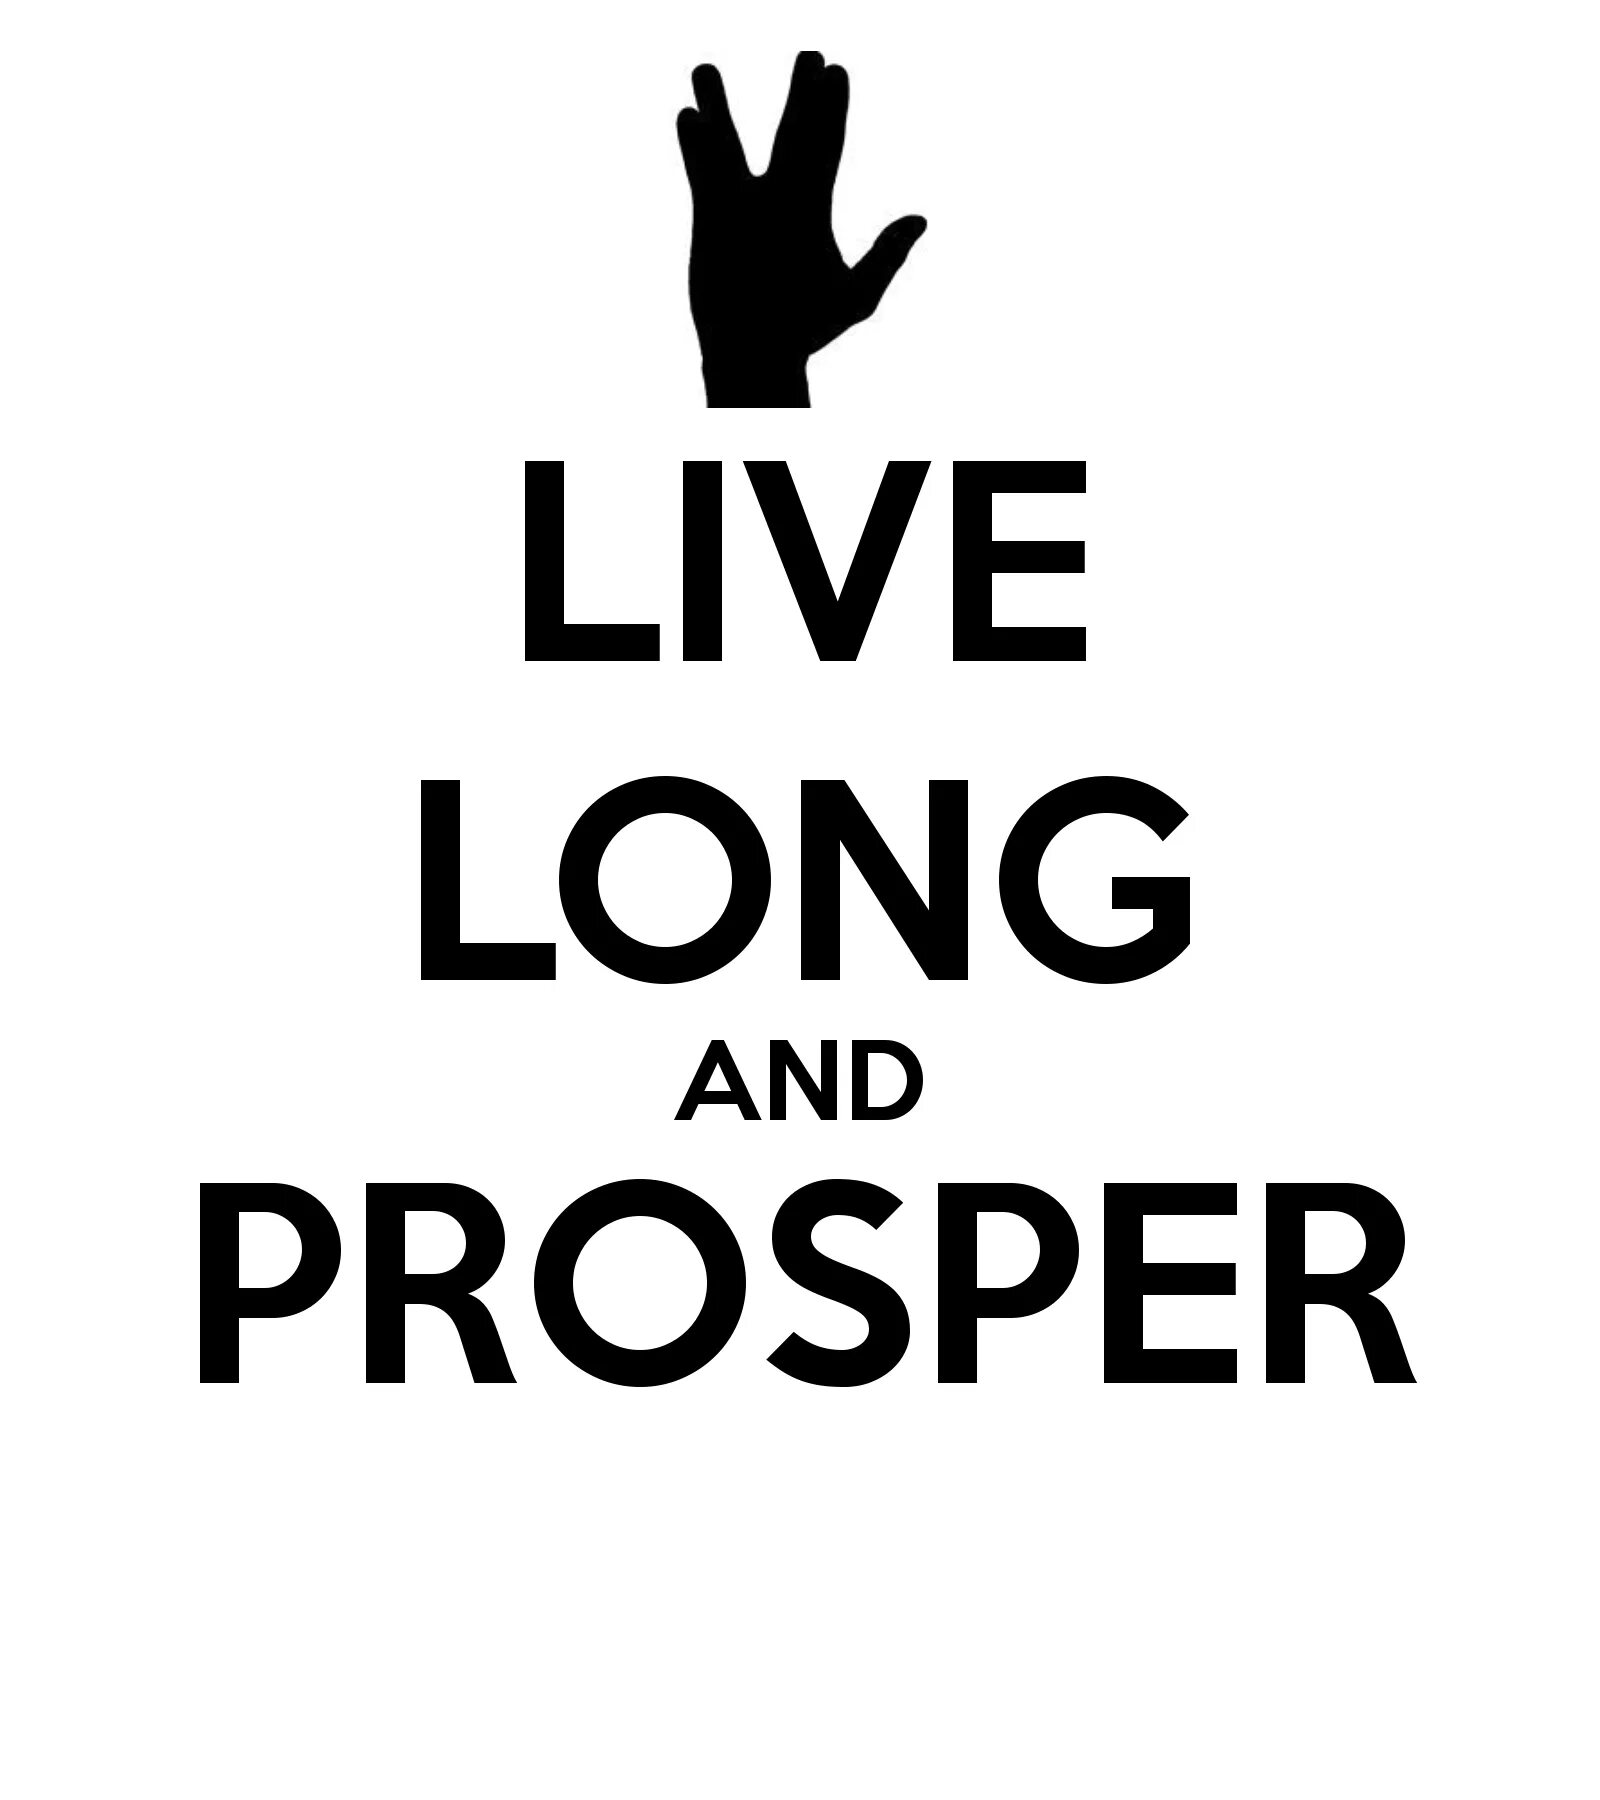 They lived long and life. Long Live. Live long and Prosper. Постер Live long and Prosper. Стикер Live long and Prosper.